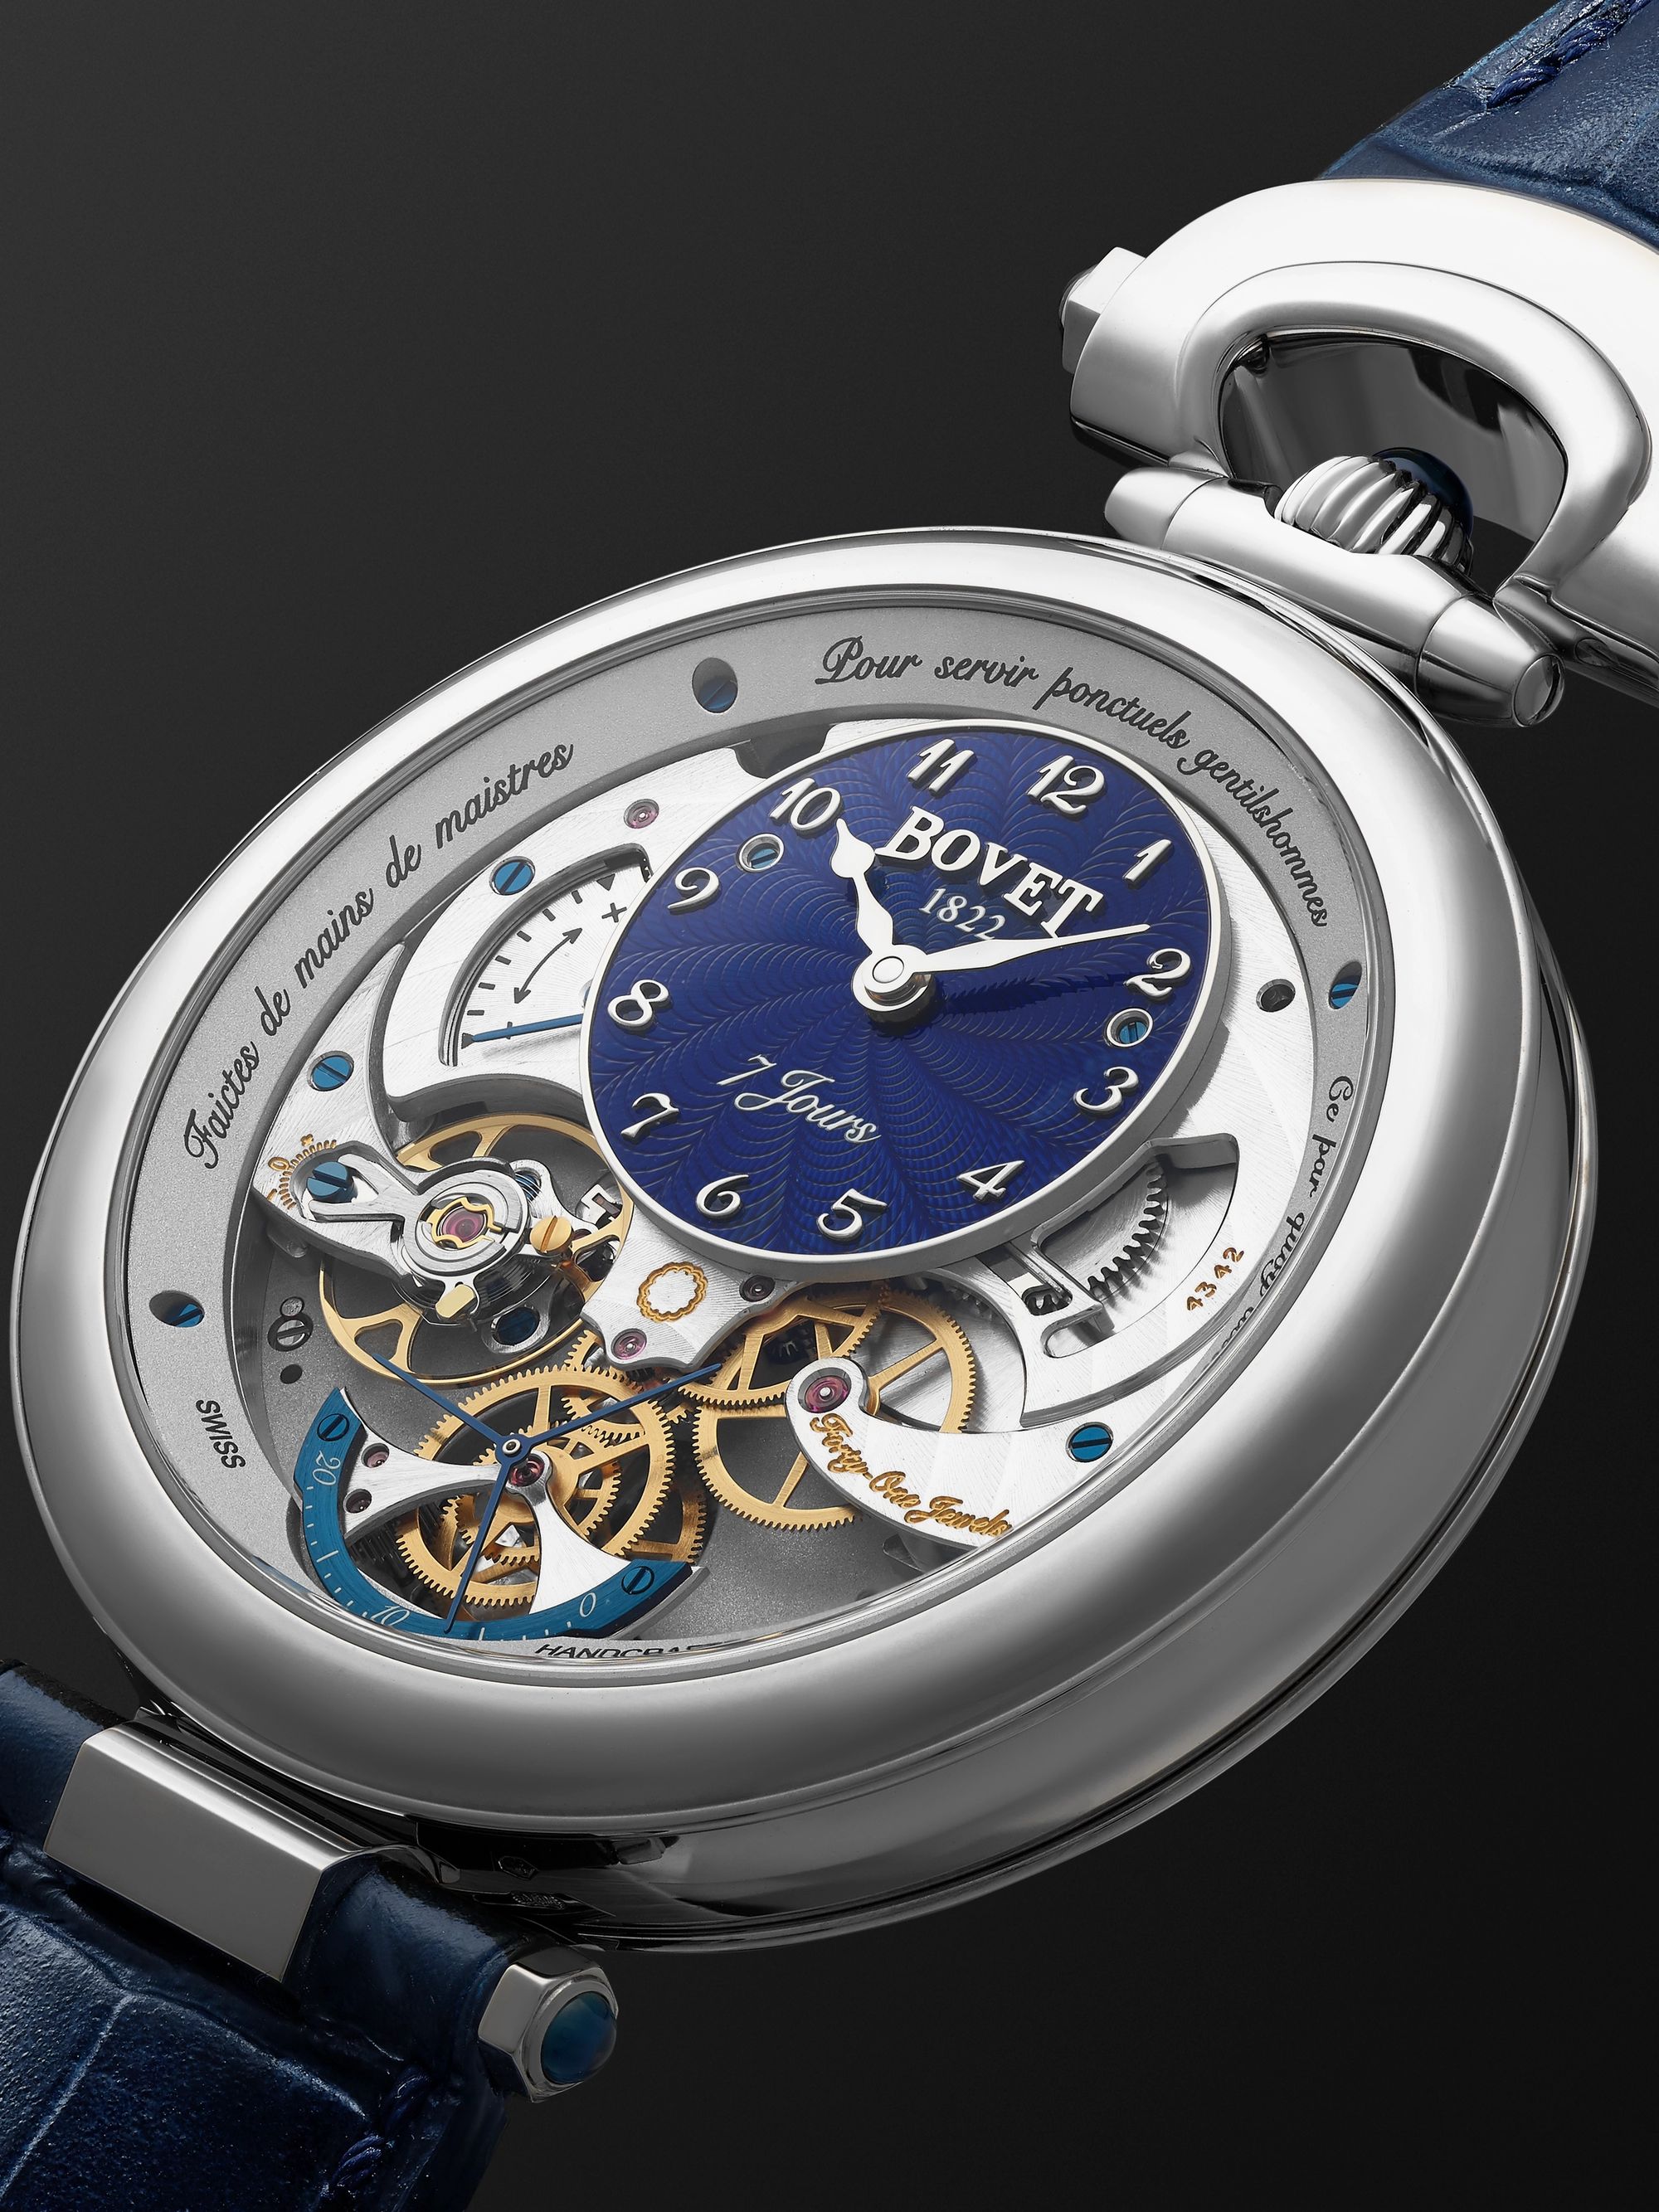 BOVET Monsieur BOVET Hand-Wound 43mm 18-Karat White Gold and Leather Watch, Ref. No. AI43018